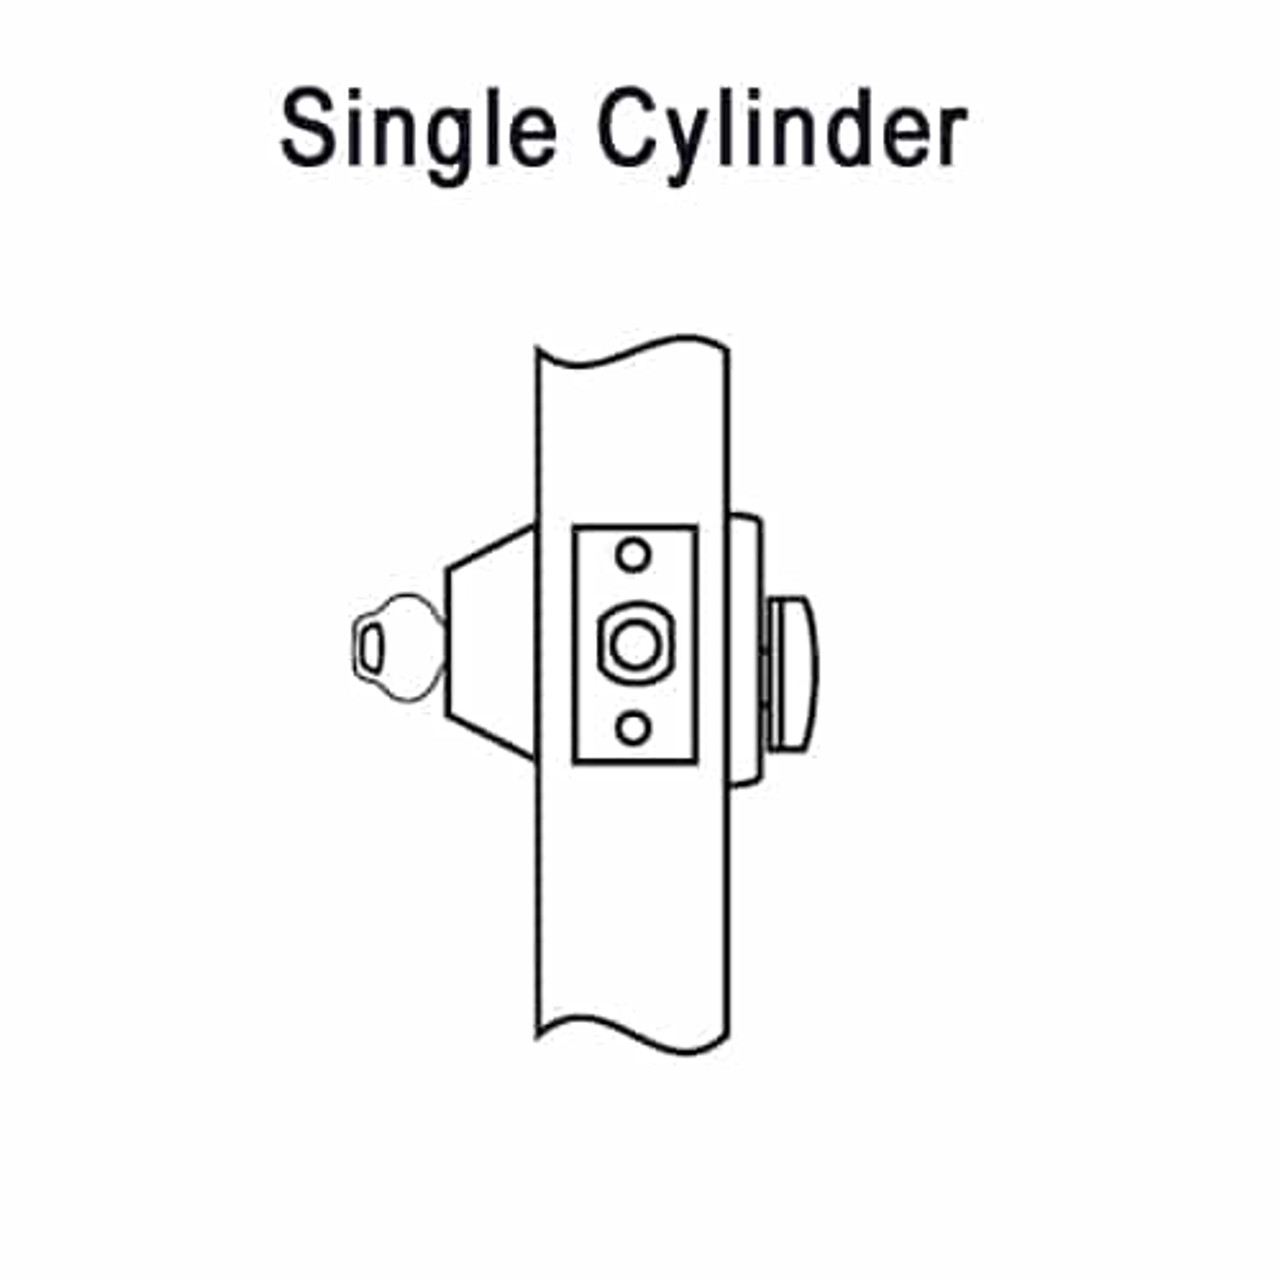 DL2213-625 Corbin DL2200 Series Cylindrical Deadlocks with Single Cylinder in Bright Chrome